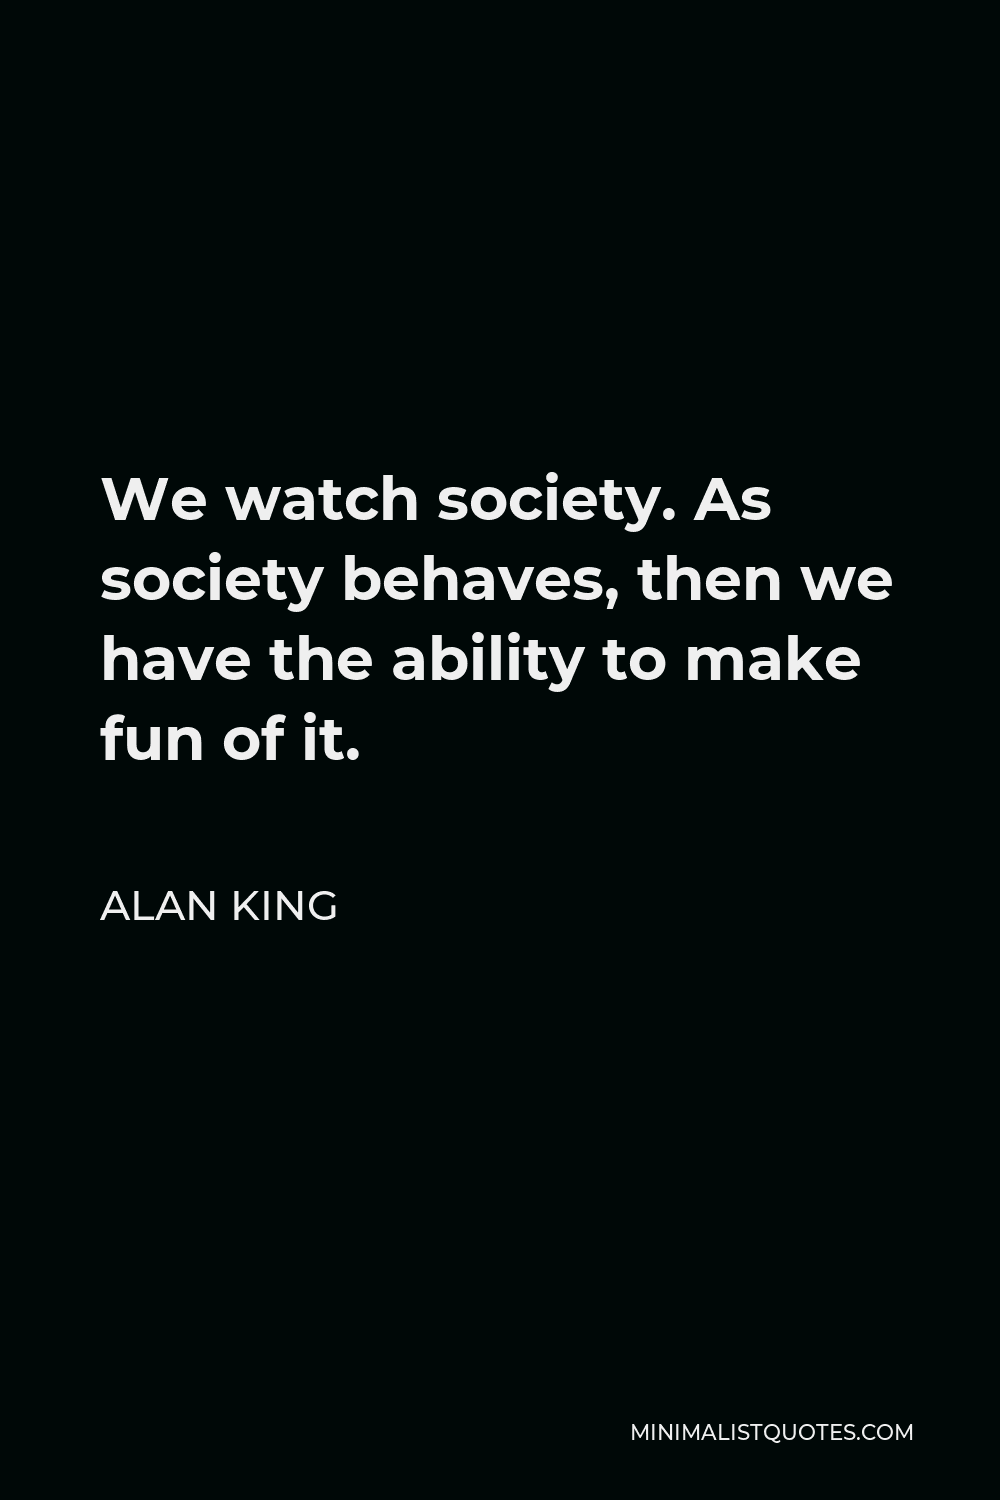 Alan King Quote - We watch society. As society behaves, then we have the ability to make fun of it.